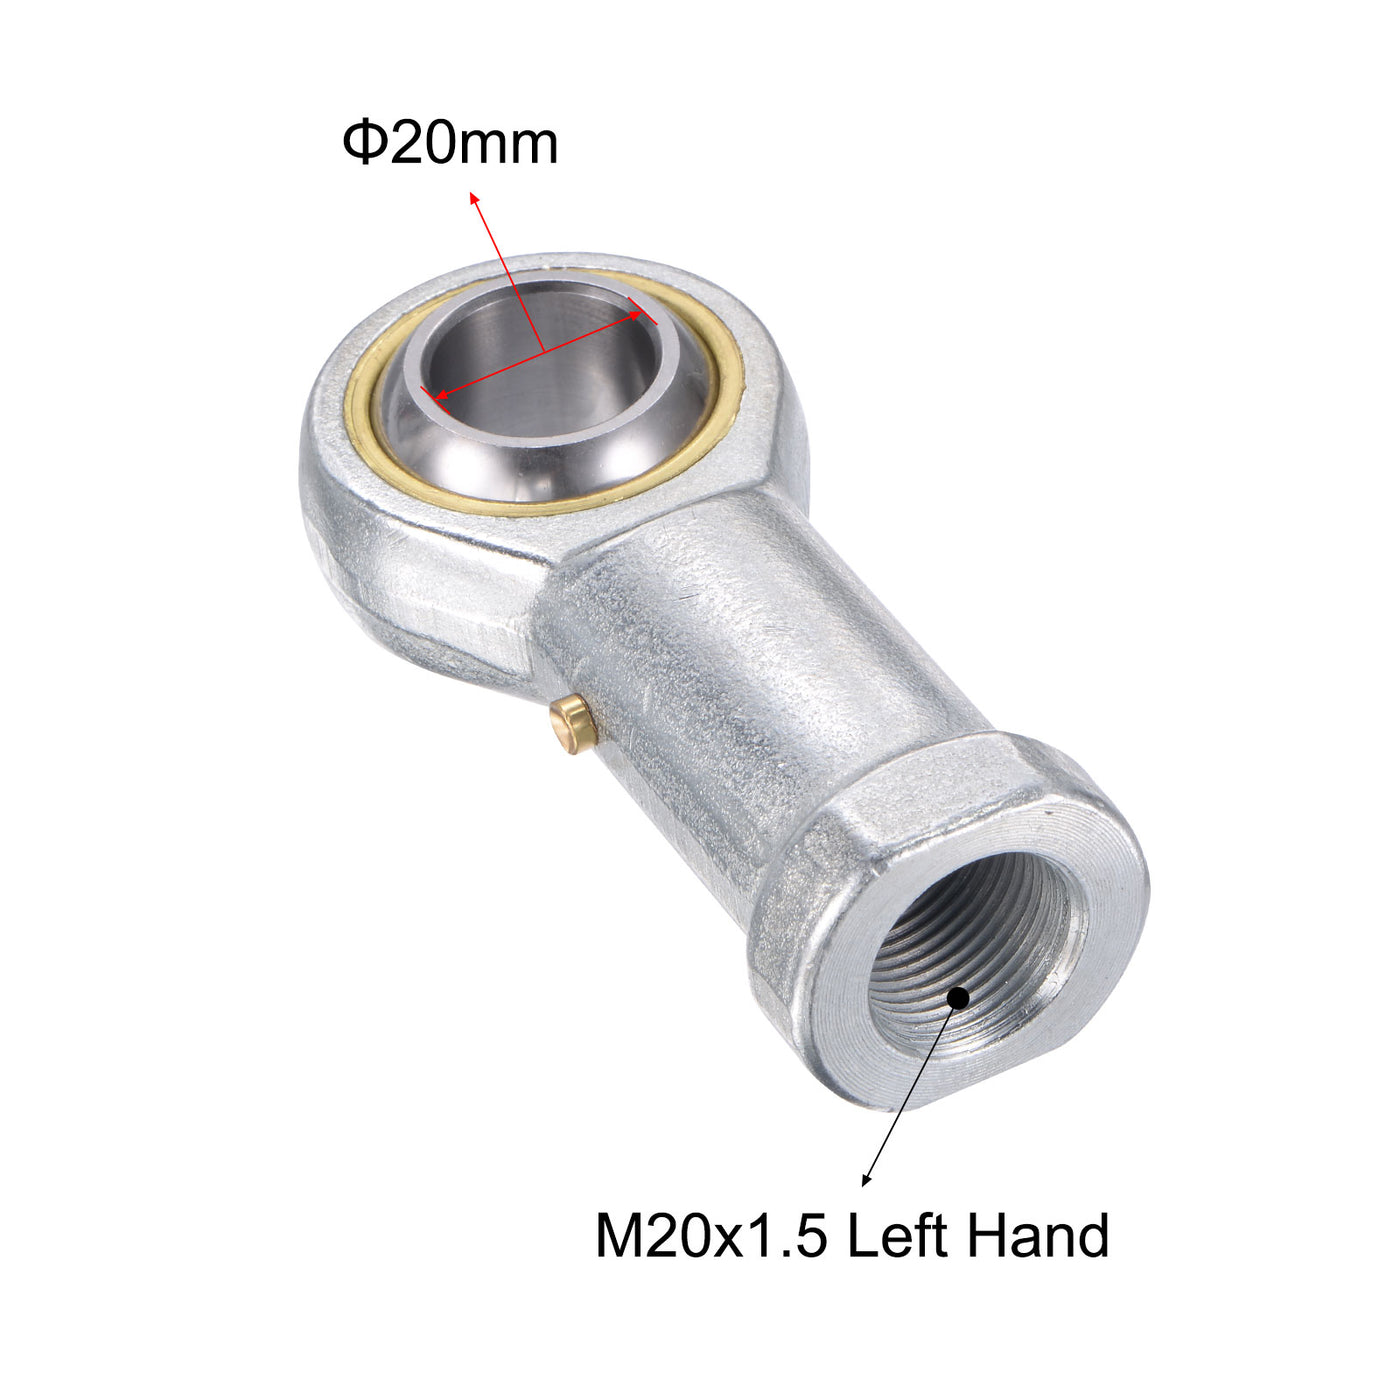 uxcell Uxcell PHS20 Rod End Bearing 20mm Bore Self-lubricated M20x1.5 Left Hand Female Thread